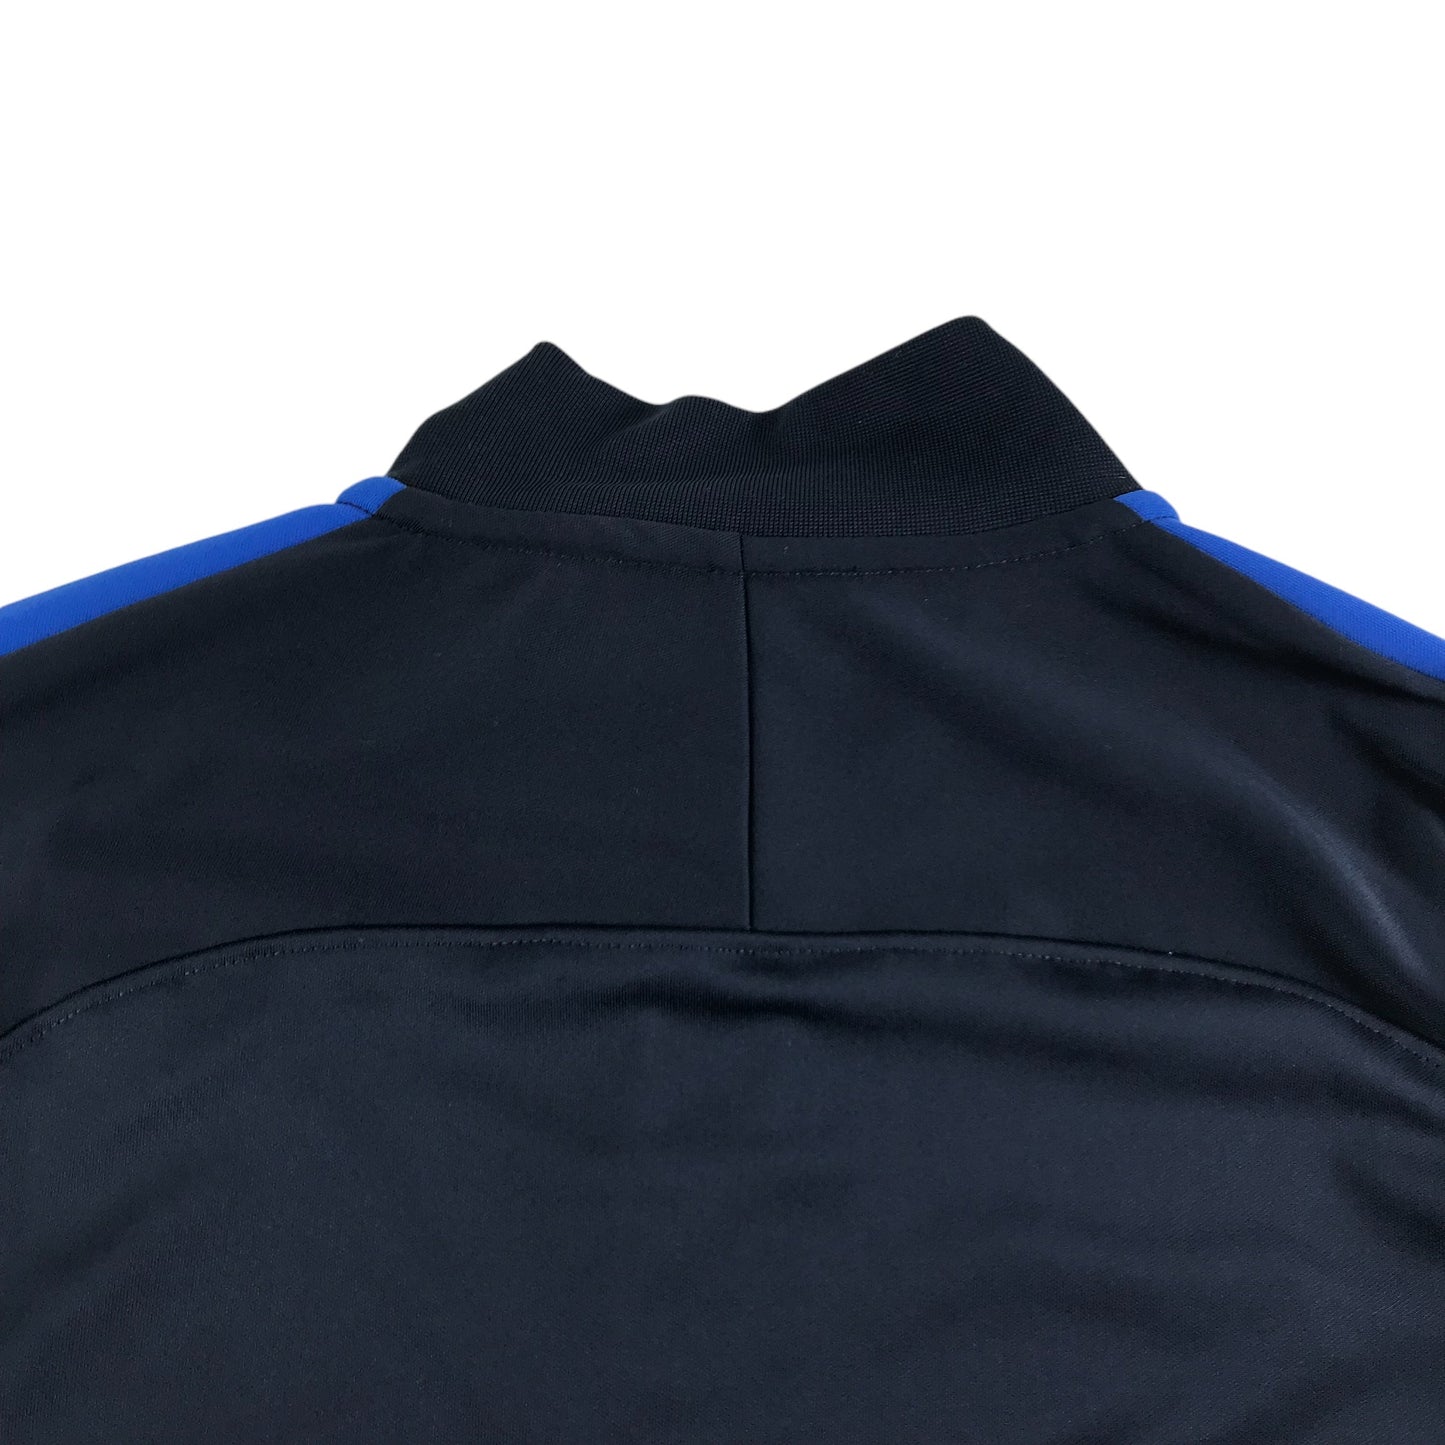 Nike Sweatshirt Age 12 Navy and Blue Panelled Full Zipper Top